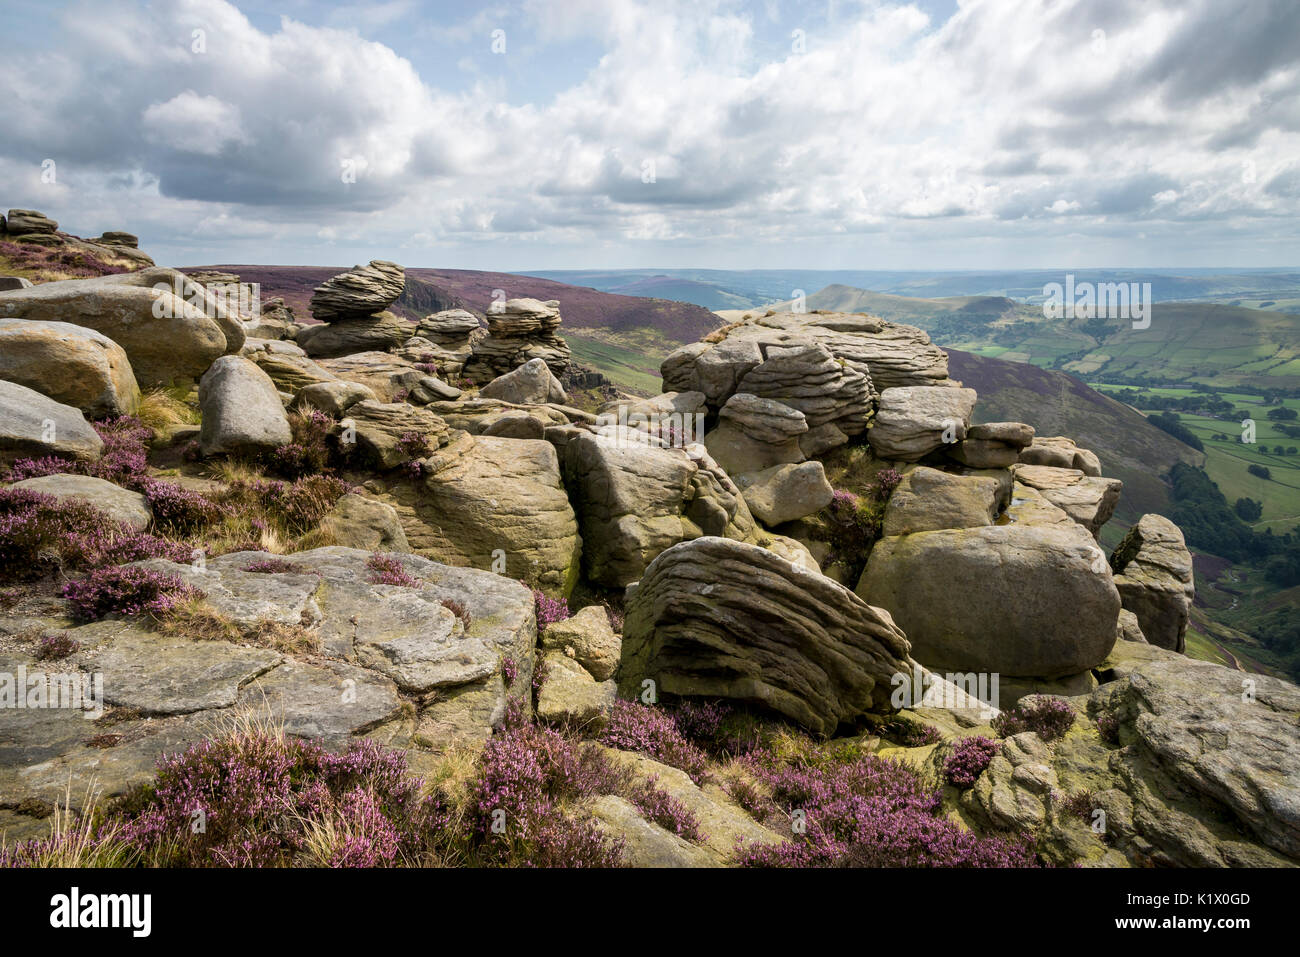 Rugged scenery at Upper Tor on the edge of Kinder Scout in the Peak District national park. Edale, Derbyshire, England. Stock Photo